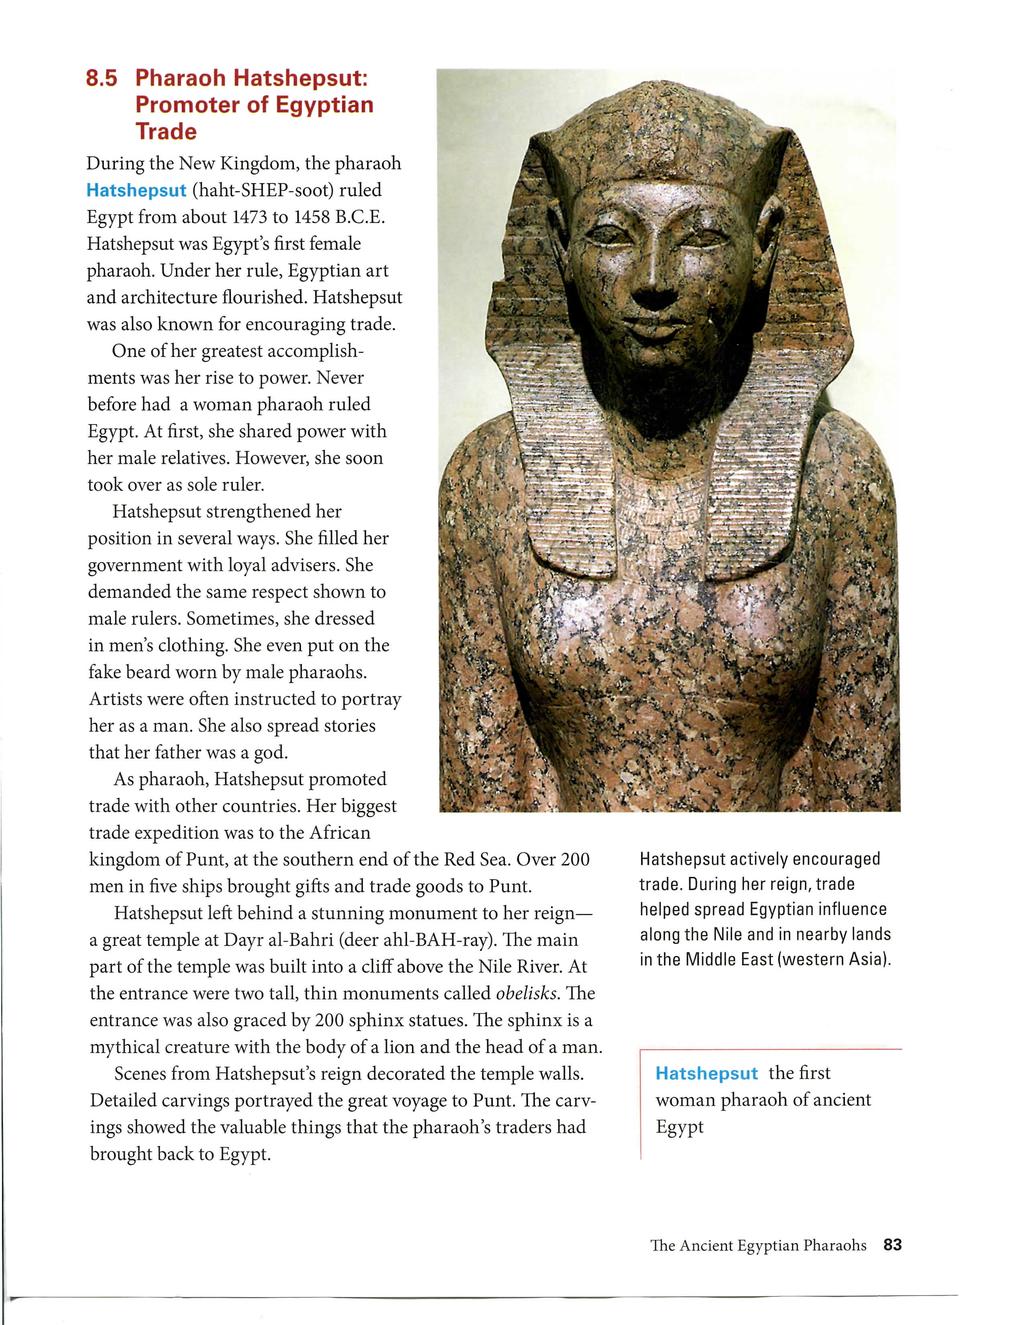 8.5 Pharaoh Hatshepsut: Promoter of Egyptian Trade During the New Kingdom, the pharaoh Hatshepsut (haht-shep-soot) ruled Egypt from about 1473 to 1458 B.C.E. Hatshepsut was Egypt's first female pharaoh.